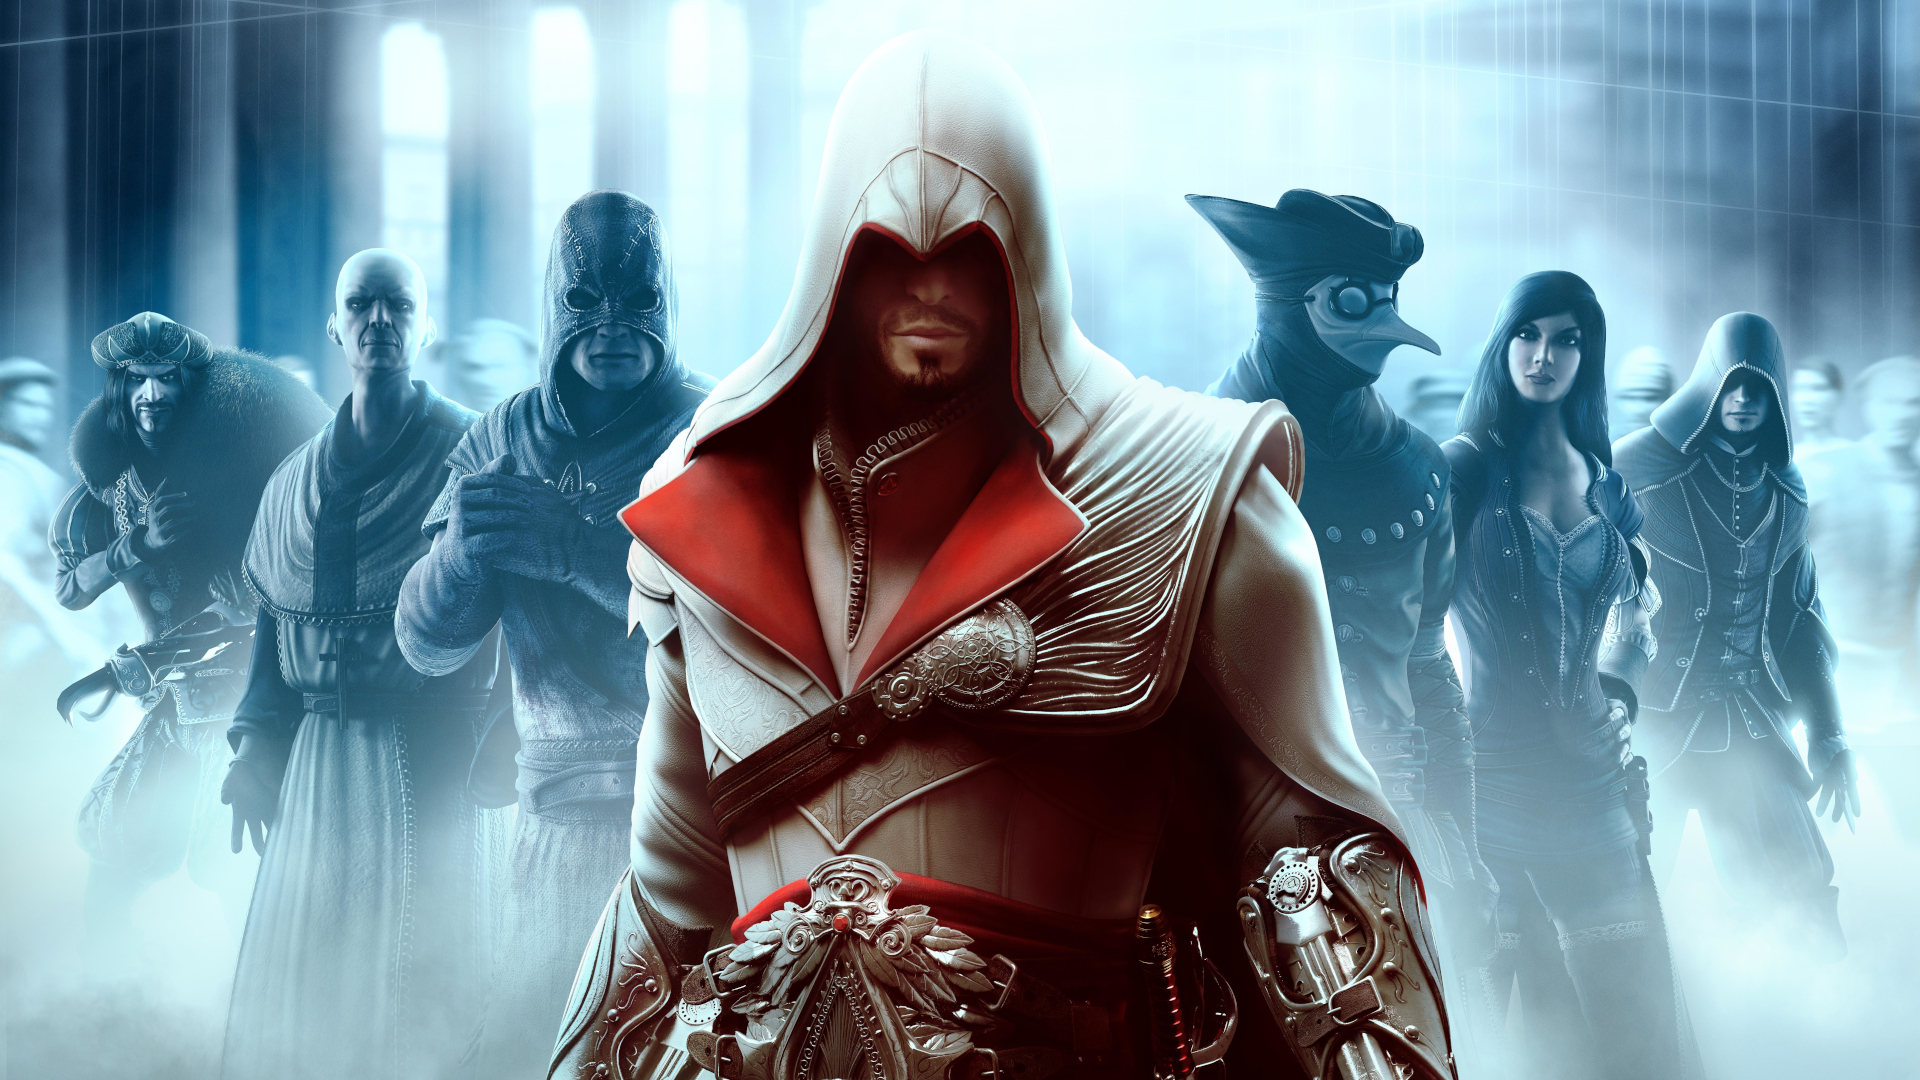 Ezio stands in front of a line of other assassins in Assassin's Creed Brotherhood